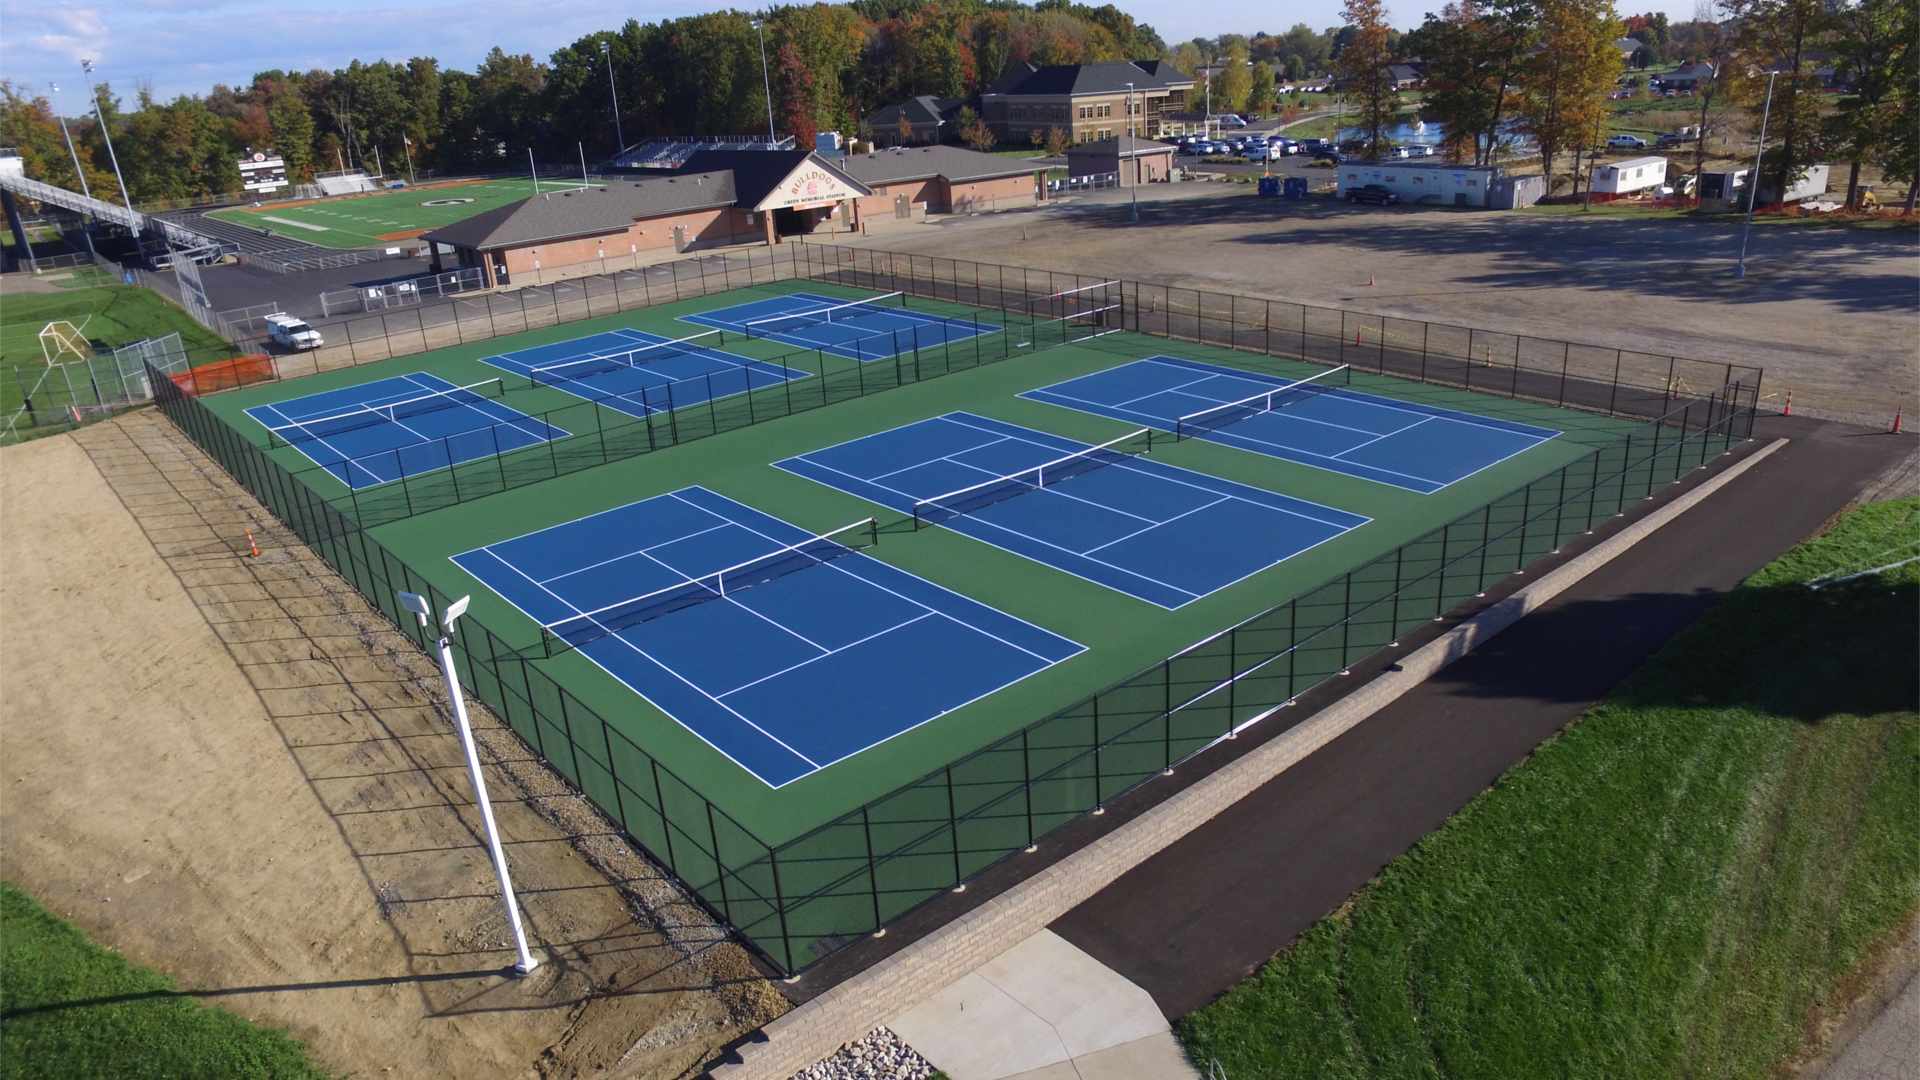 Vasco Green Tennis Featured 1 Featured Projects